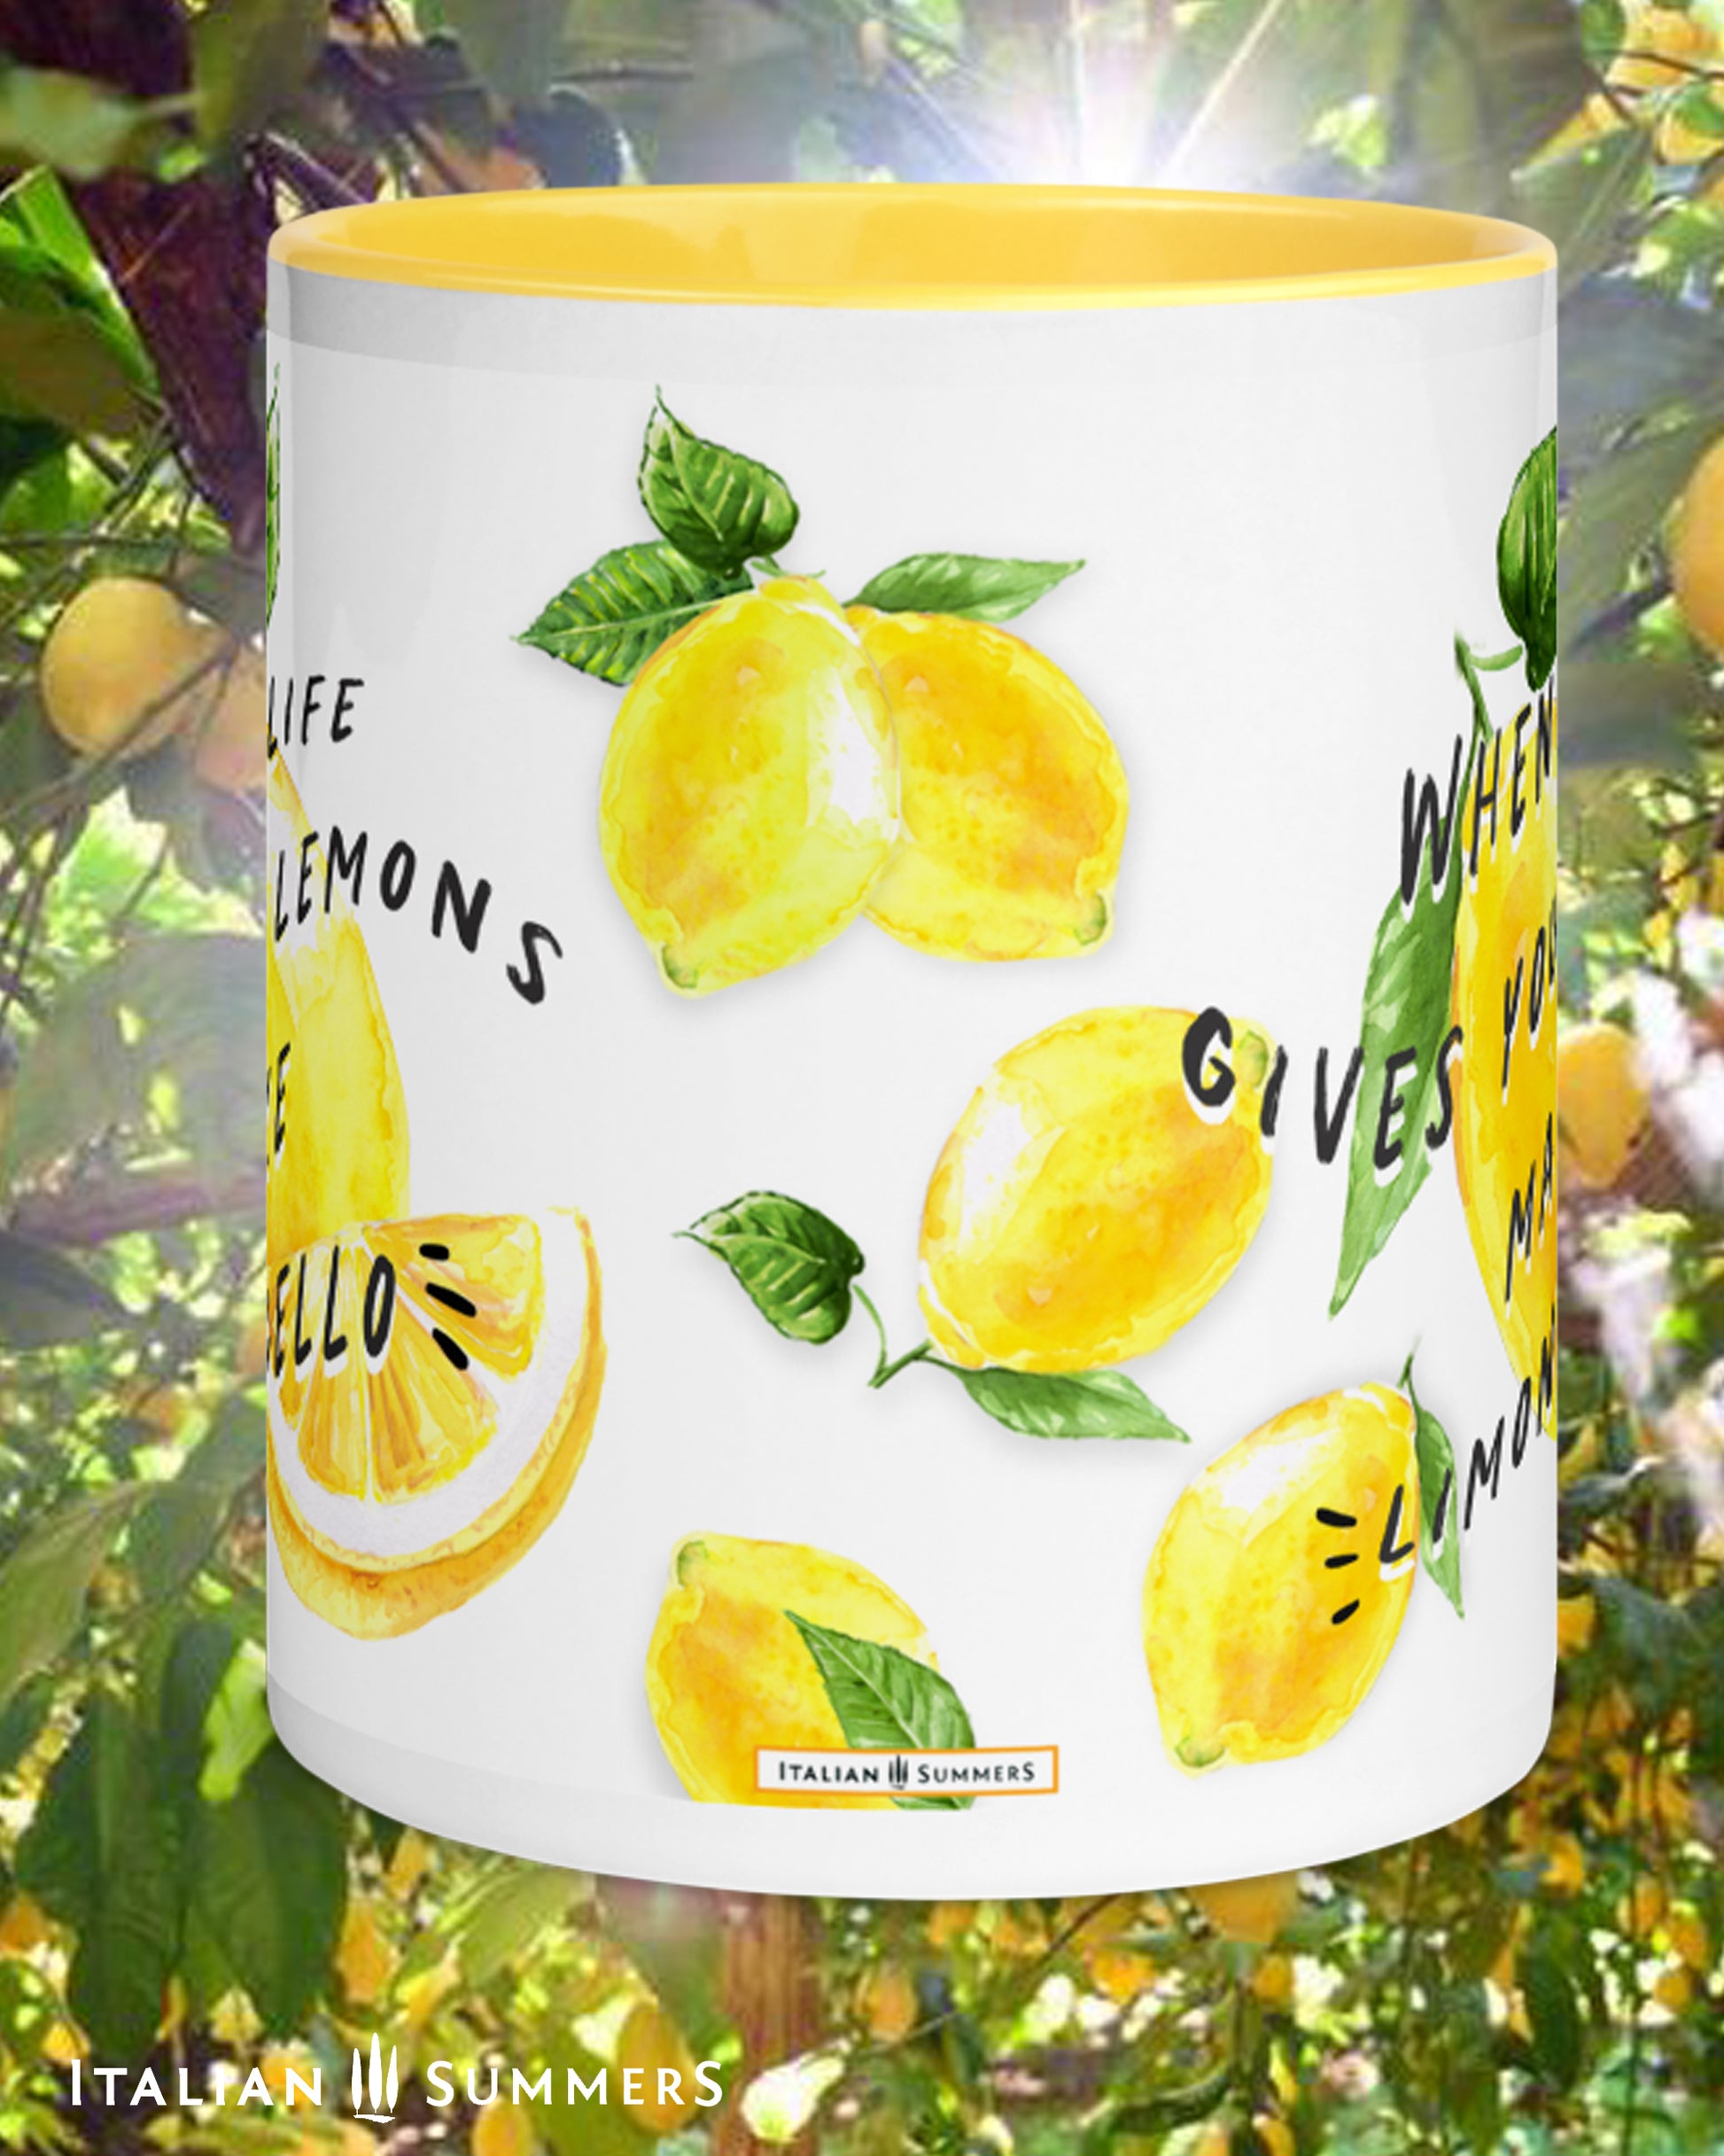 Italian inspired mug with happy lemons and lemons slices and the quote "When life gives you lemons make limoncello" The mugs are available with a yellow inside and handle or in white. Print wraps all around. Made by Italian Summers